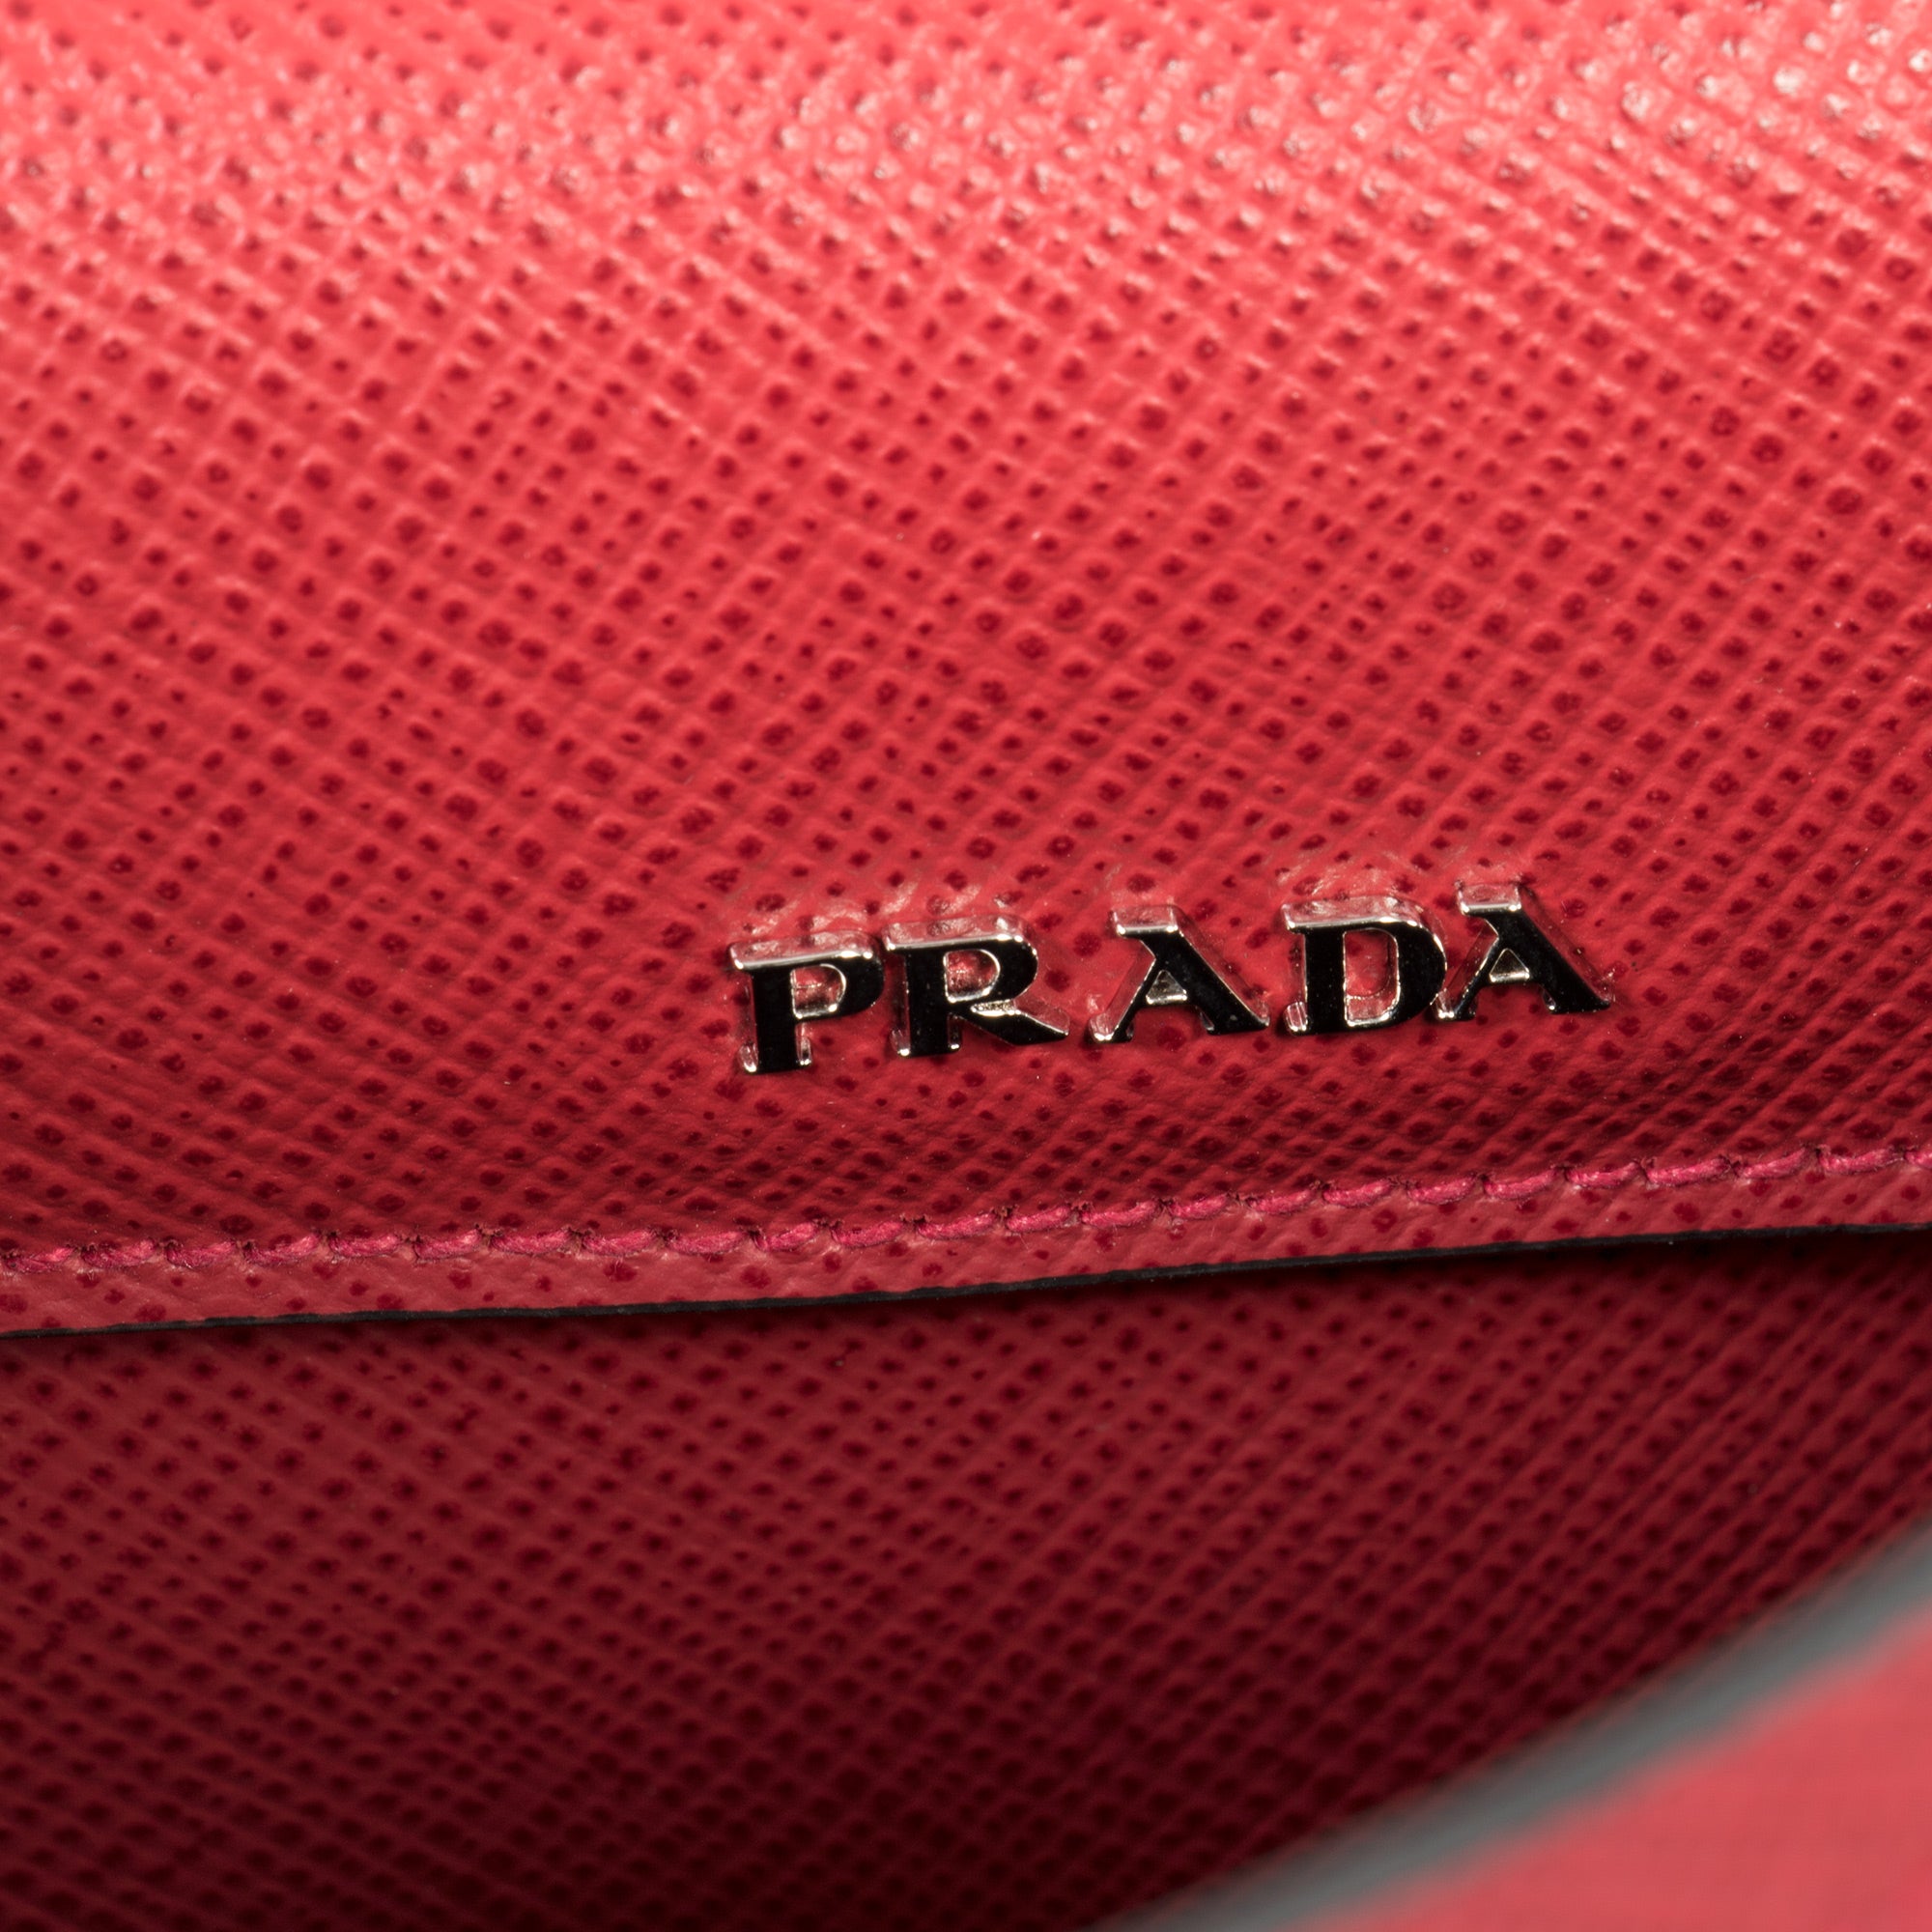 BRANDHABIT - The Prada Multi Bag 🤍 Available in Genuine Leather R2800 🤍  Hurry And Order Yours Only 1 Piece Available 🤍 #brandhabit #handbags  #style #handbag #newarrivals #trendy #fashion #fashionforward #newhandbag  #new